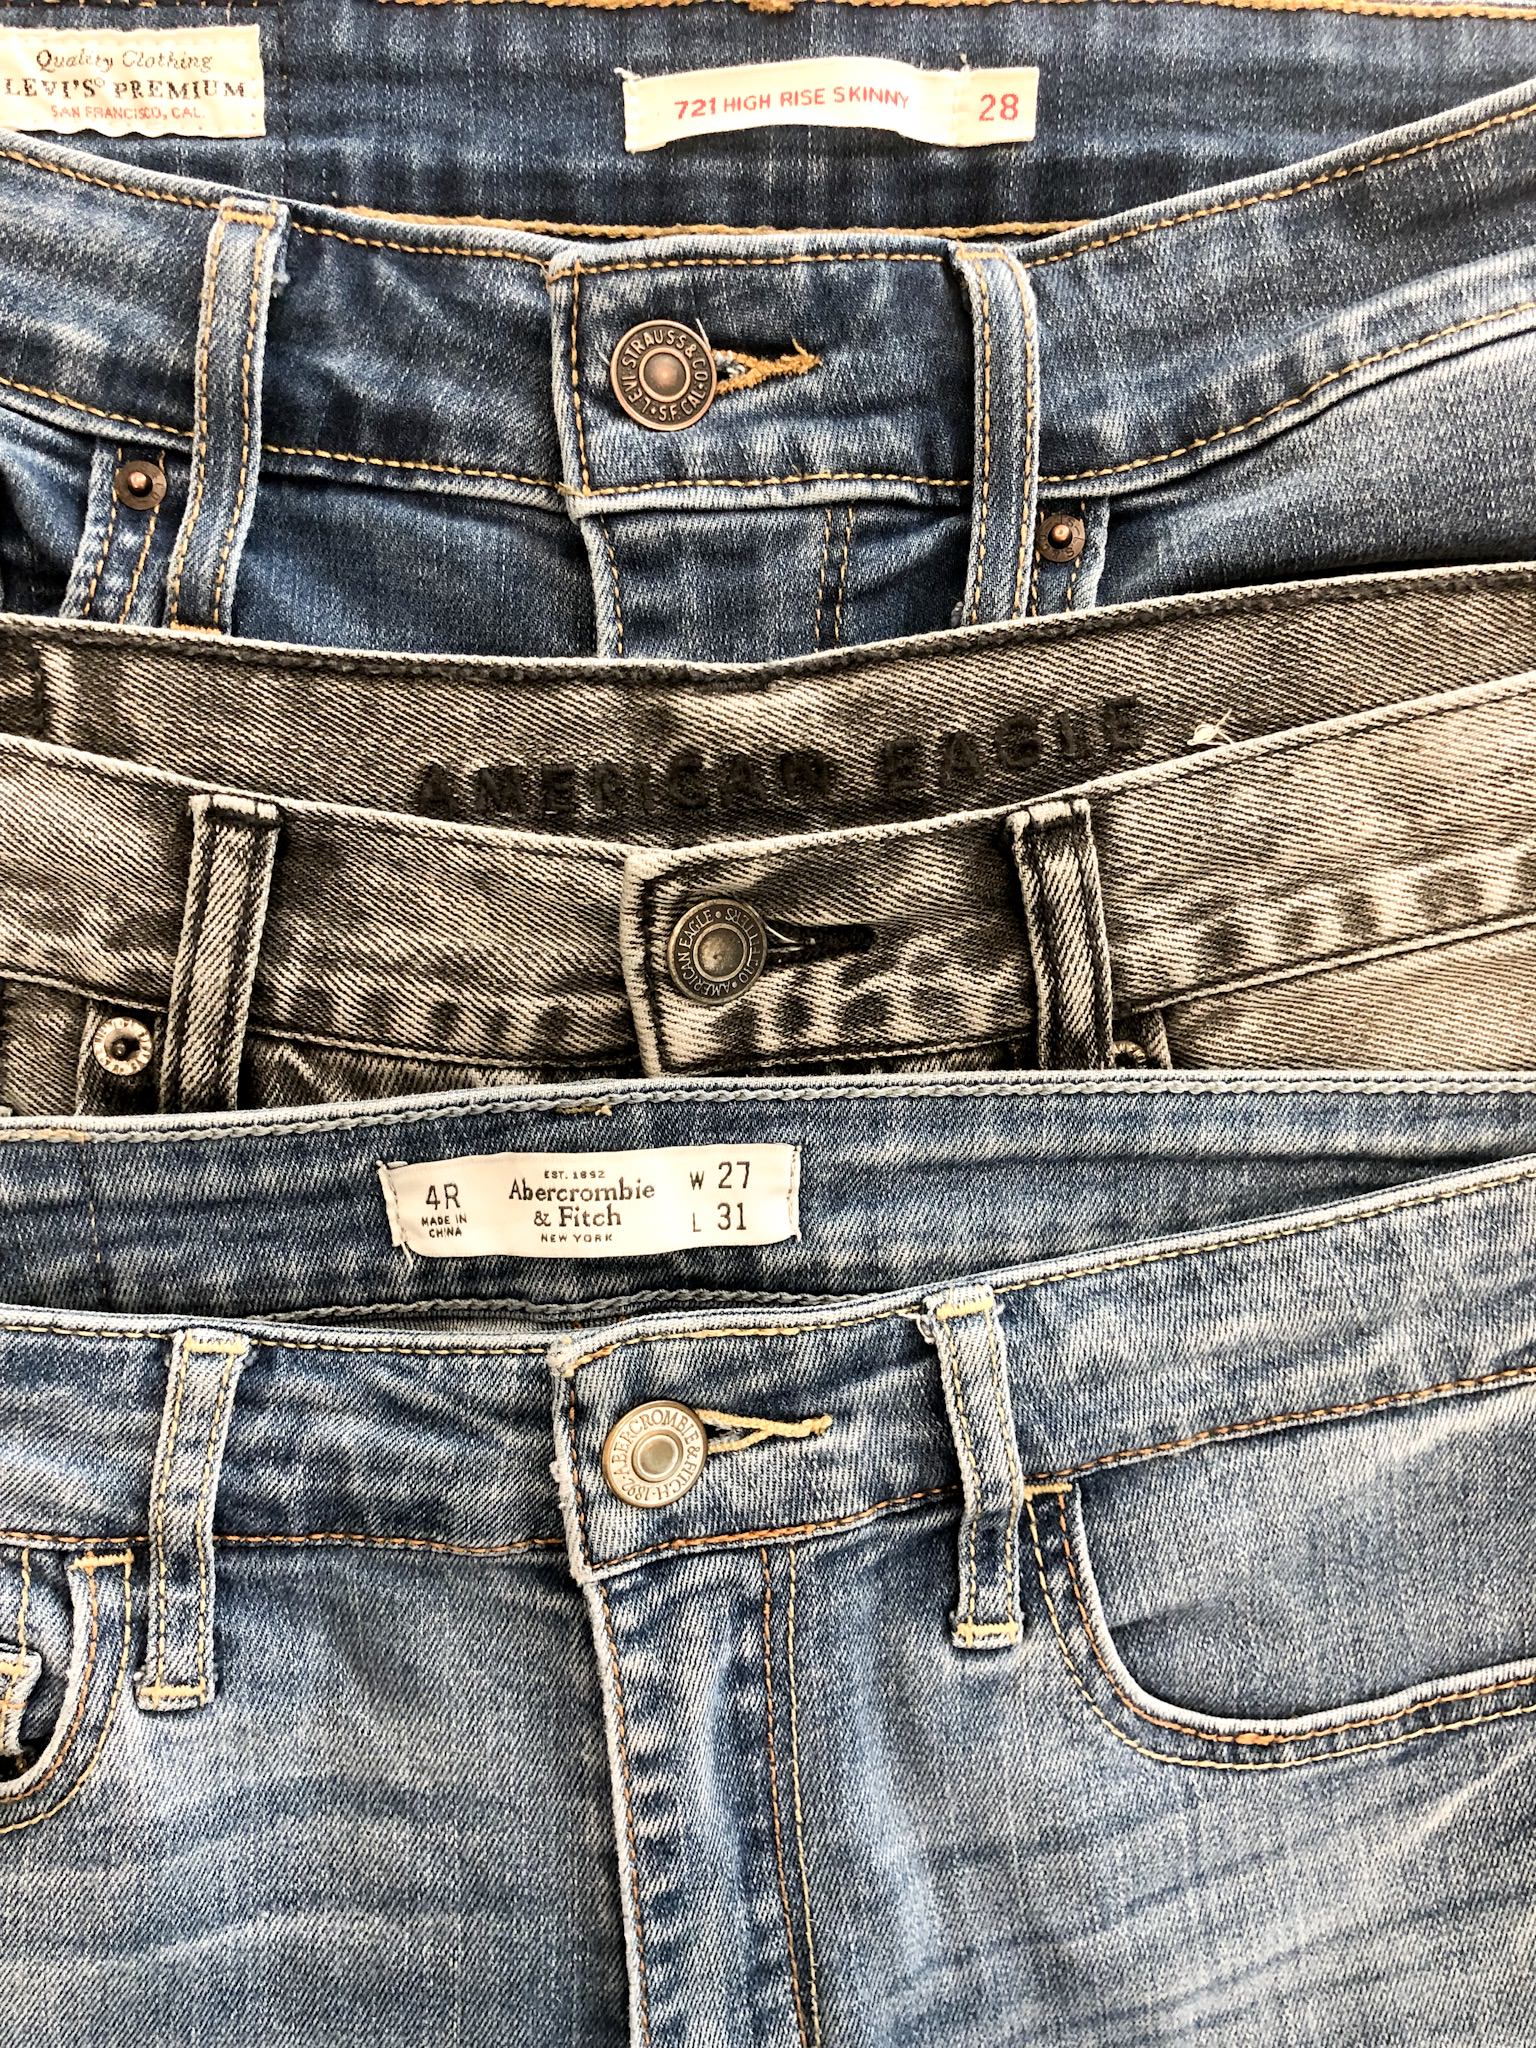 american eagle sizes compared to levis